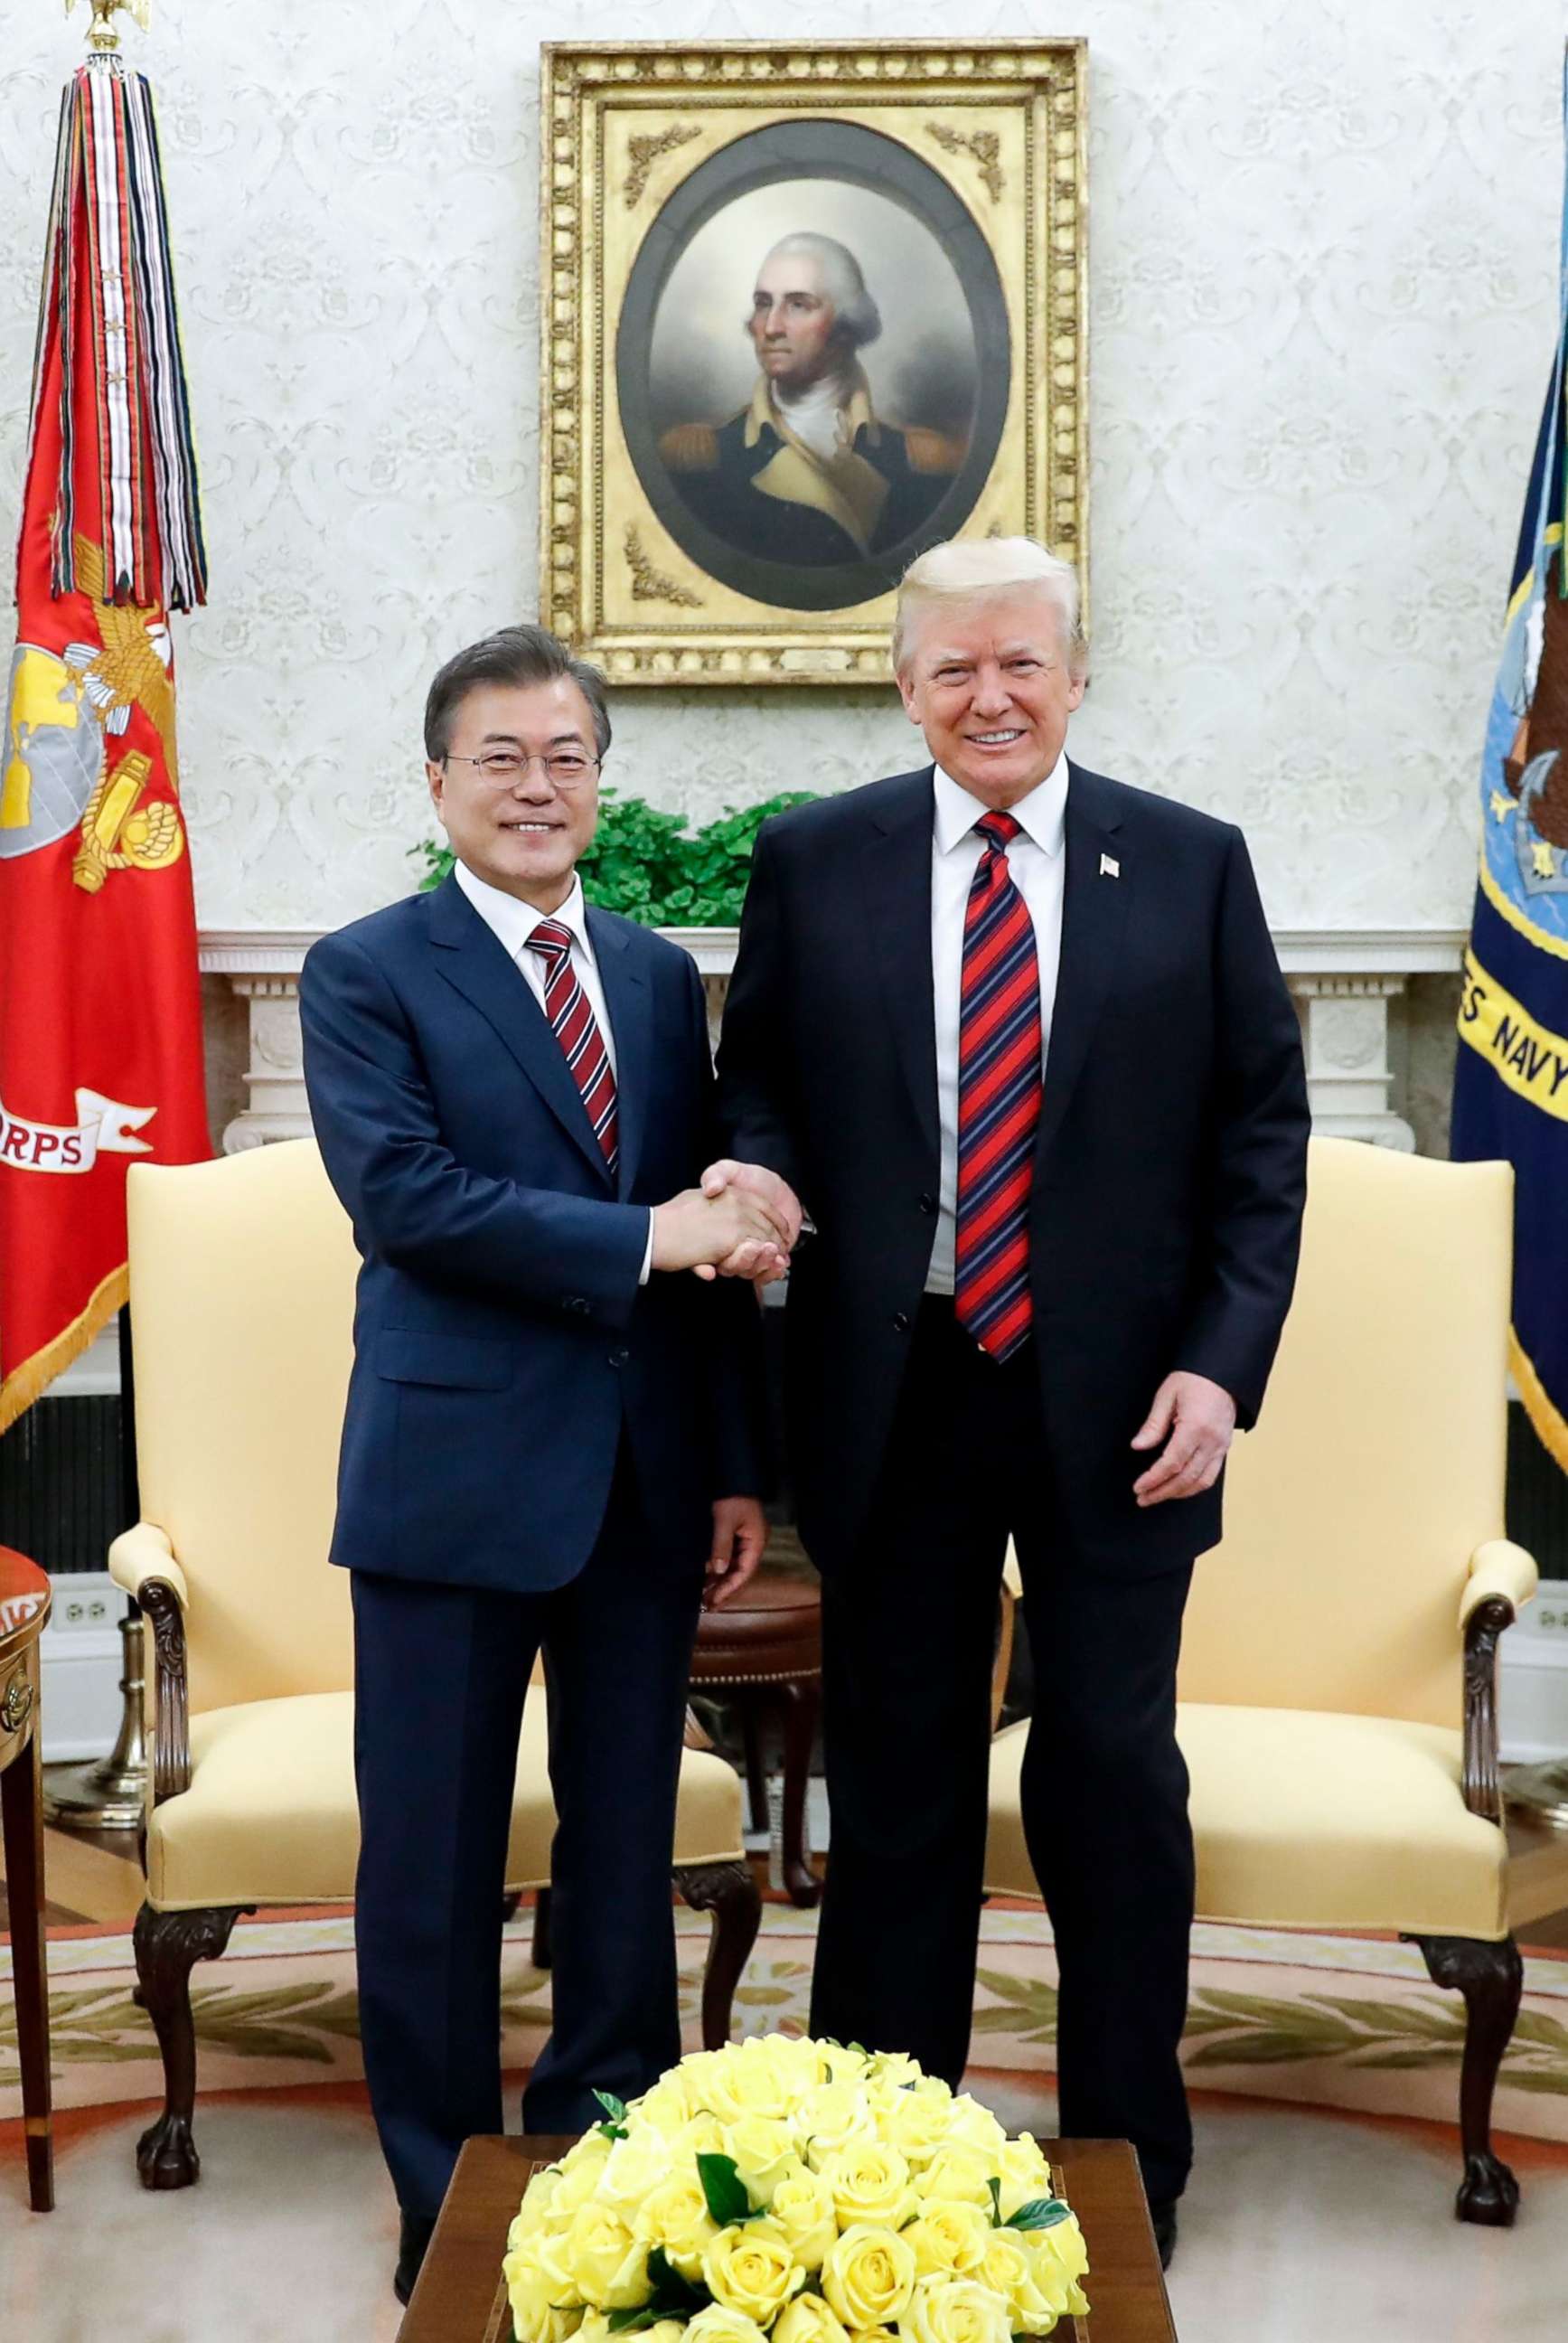 PHOTO: South Korean President Moon Jae-in and President Donald J. Trump shake hands during a meeting at the White House in Washington, May 22, 2018.